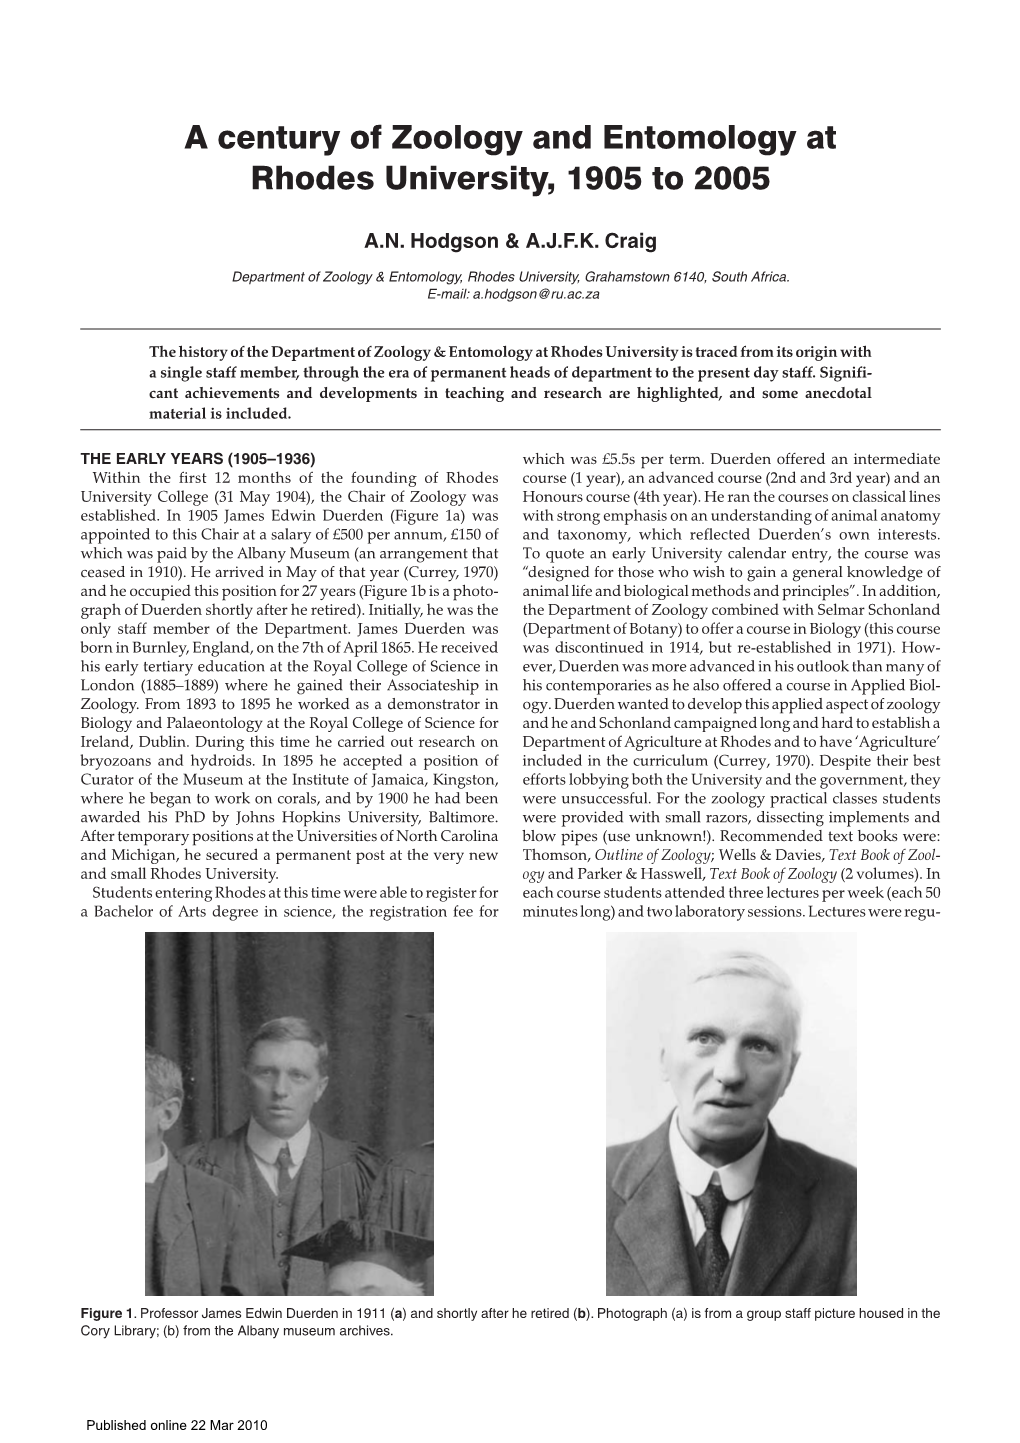 A Century of Zoology and Entomology at Rhodes University, 1905 to 2005